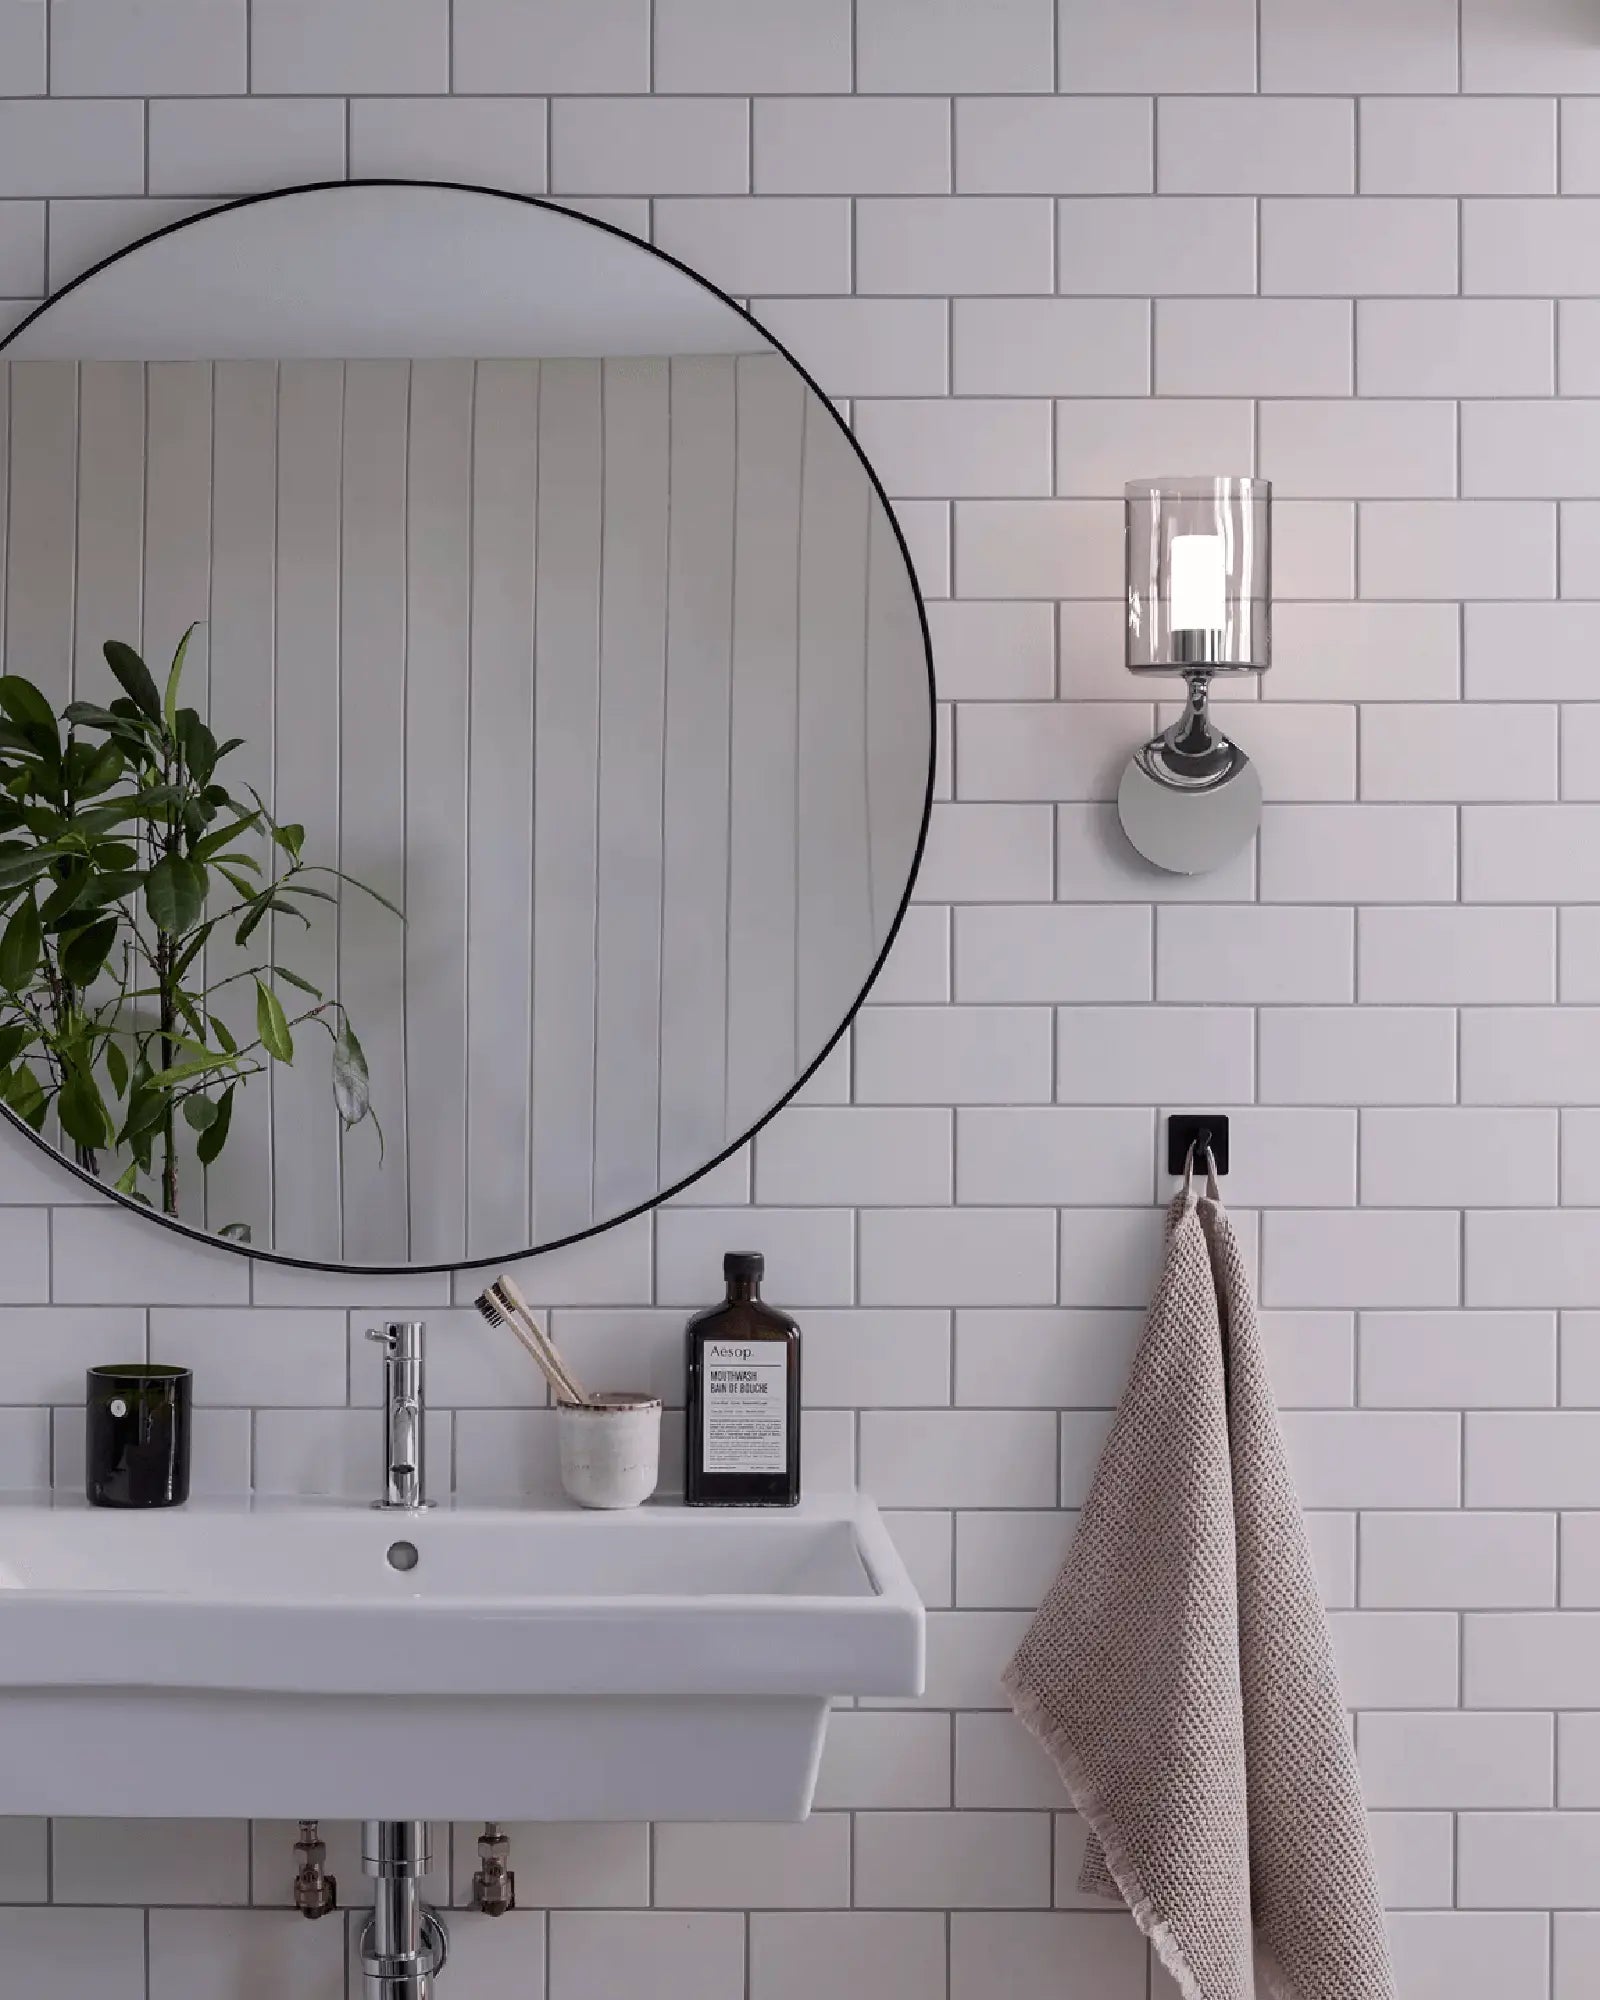 Elena contemporary wall light in metal and glass in bathroom on the mirror side